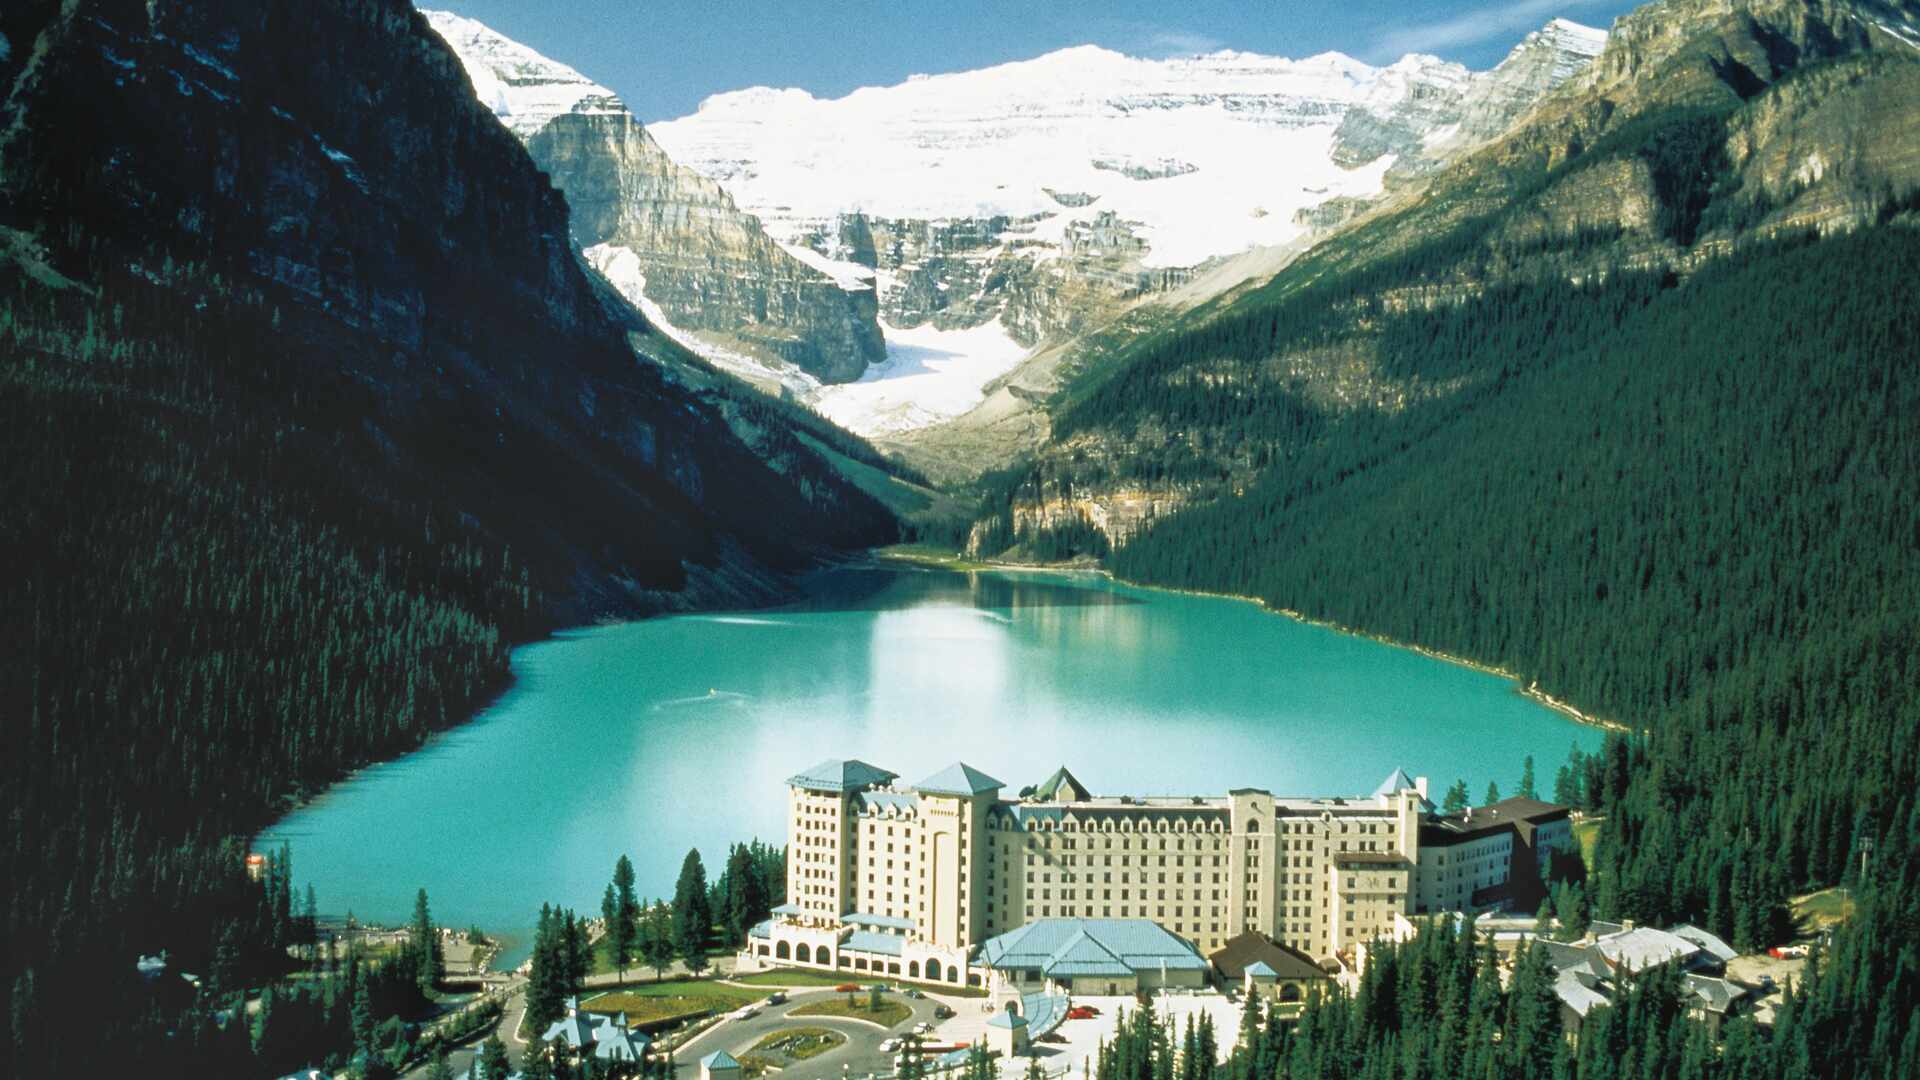 Lake Louise Fairmont Property aerial view, Canada